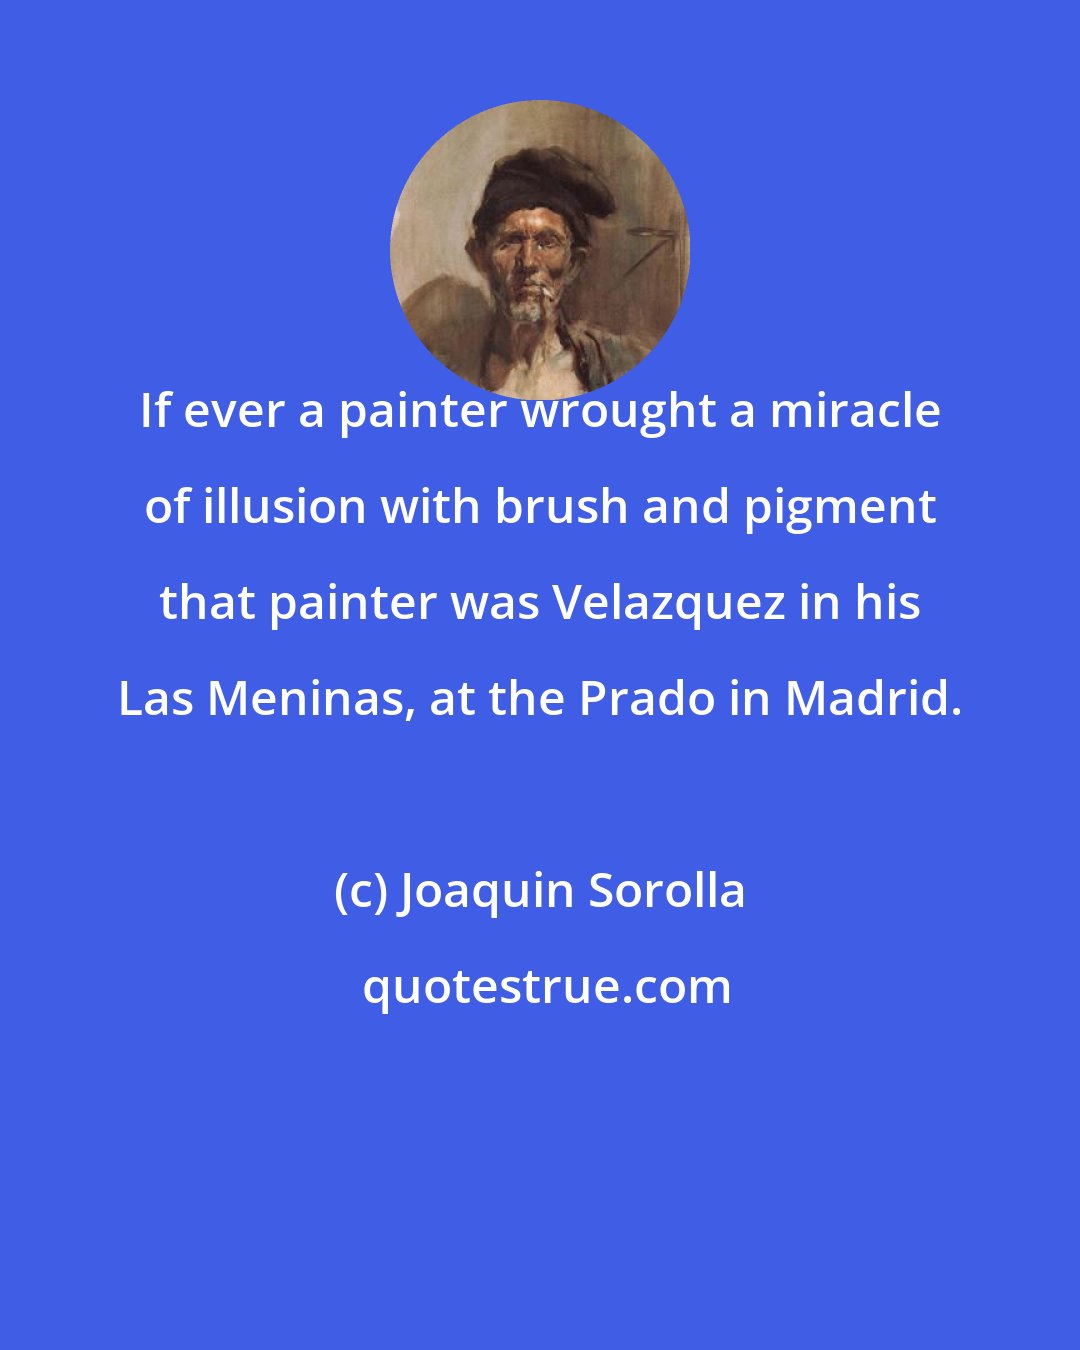 Joaquin Sorolla: If ever a painter wrought a miracle of illusion with brush and pigment that painter was Velazquez in his Las Meninas, at the Prado in Madrid.